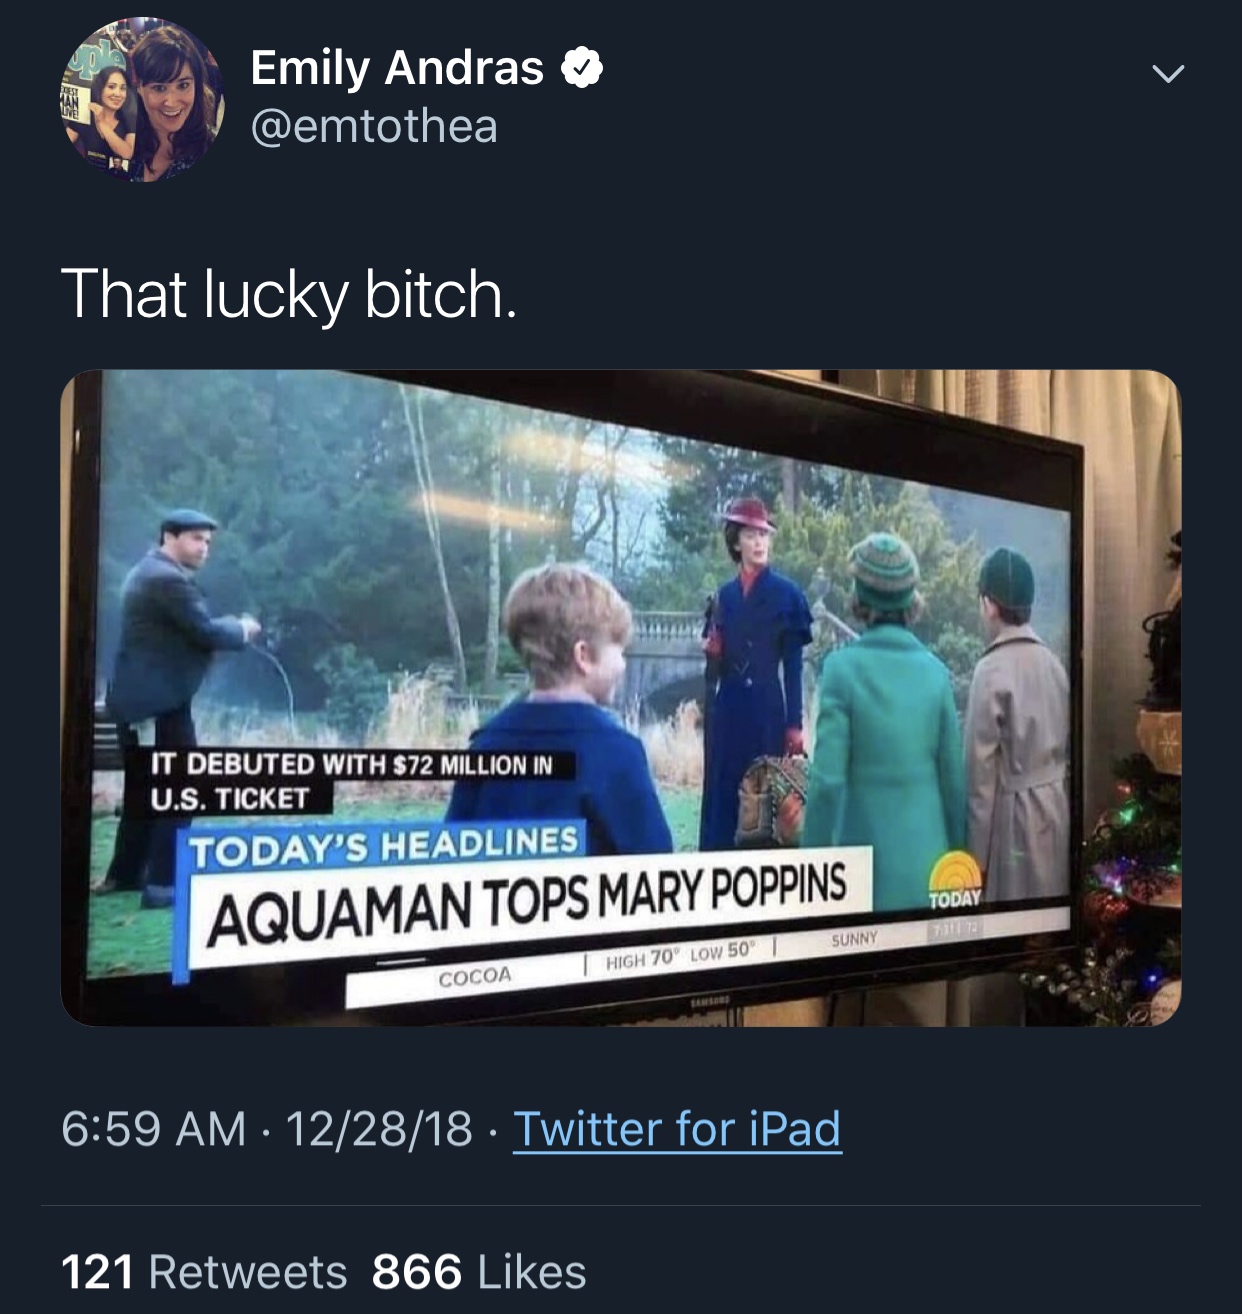 uh phrasing meme - Emily Andras That lucky bitch. It Debuted With $72 Million In U.S. Ticket Today'S Headlines Today Aquaman Tops Mary Poppins 21 T Sunny High 70 Low 50 Cocoa 122818 Twitter for iPad 121 866